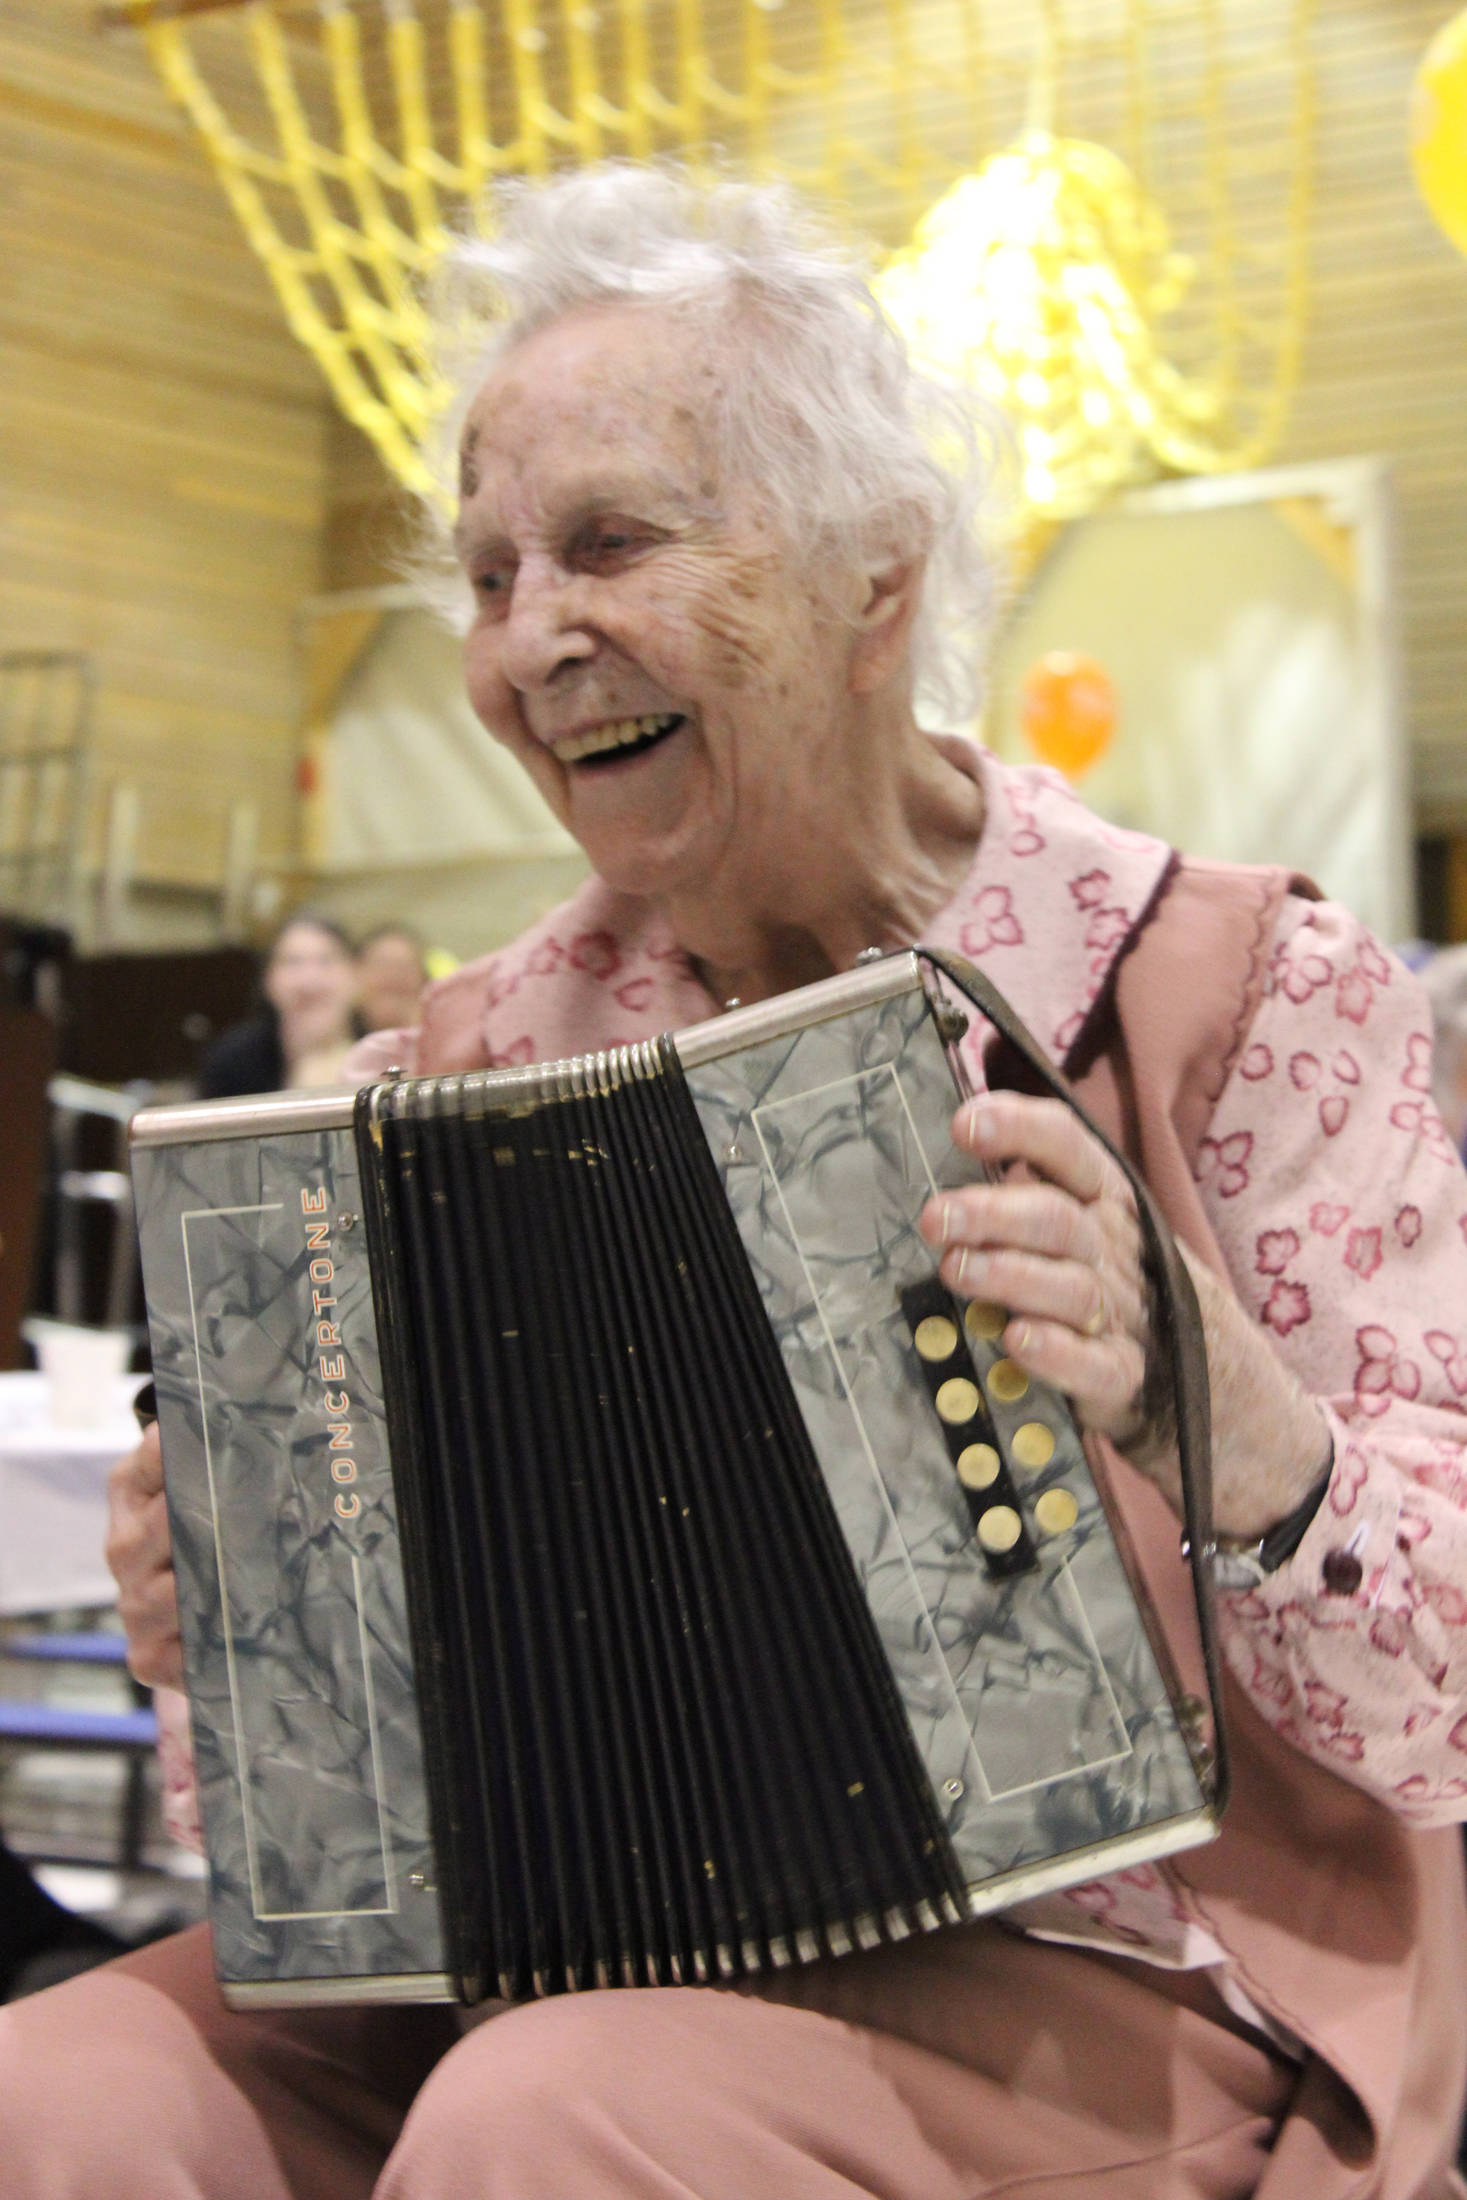 Wilma Gregory celebrates her 100th birthday Saturday by serenading family and friends to “Mockingbird Hill” played on her accordion. The celebration was held at McNeil Canyon School. (Photo by McKibben Jackinsky)